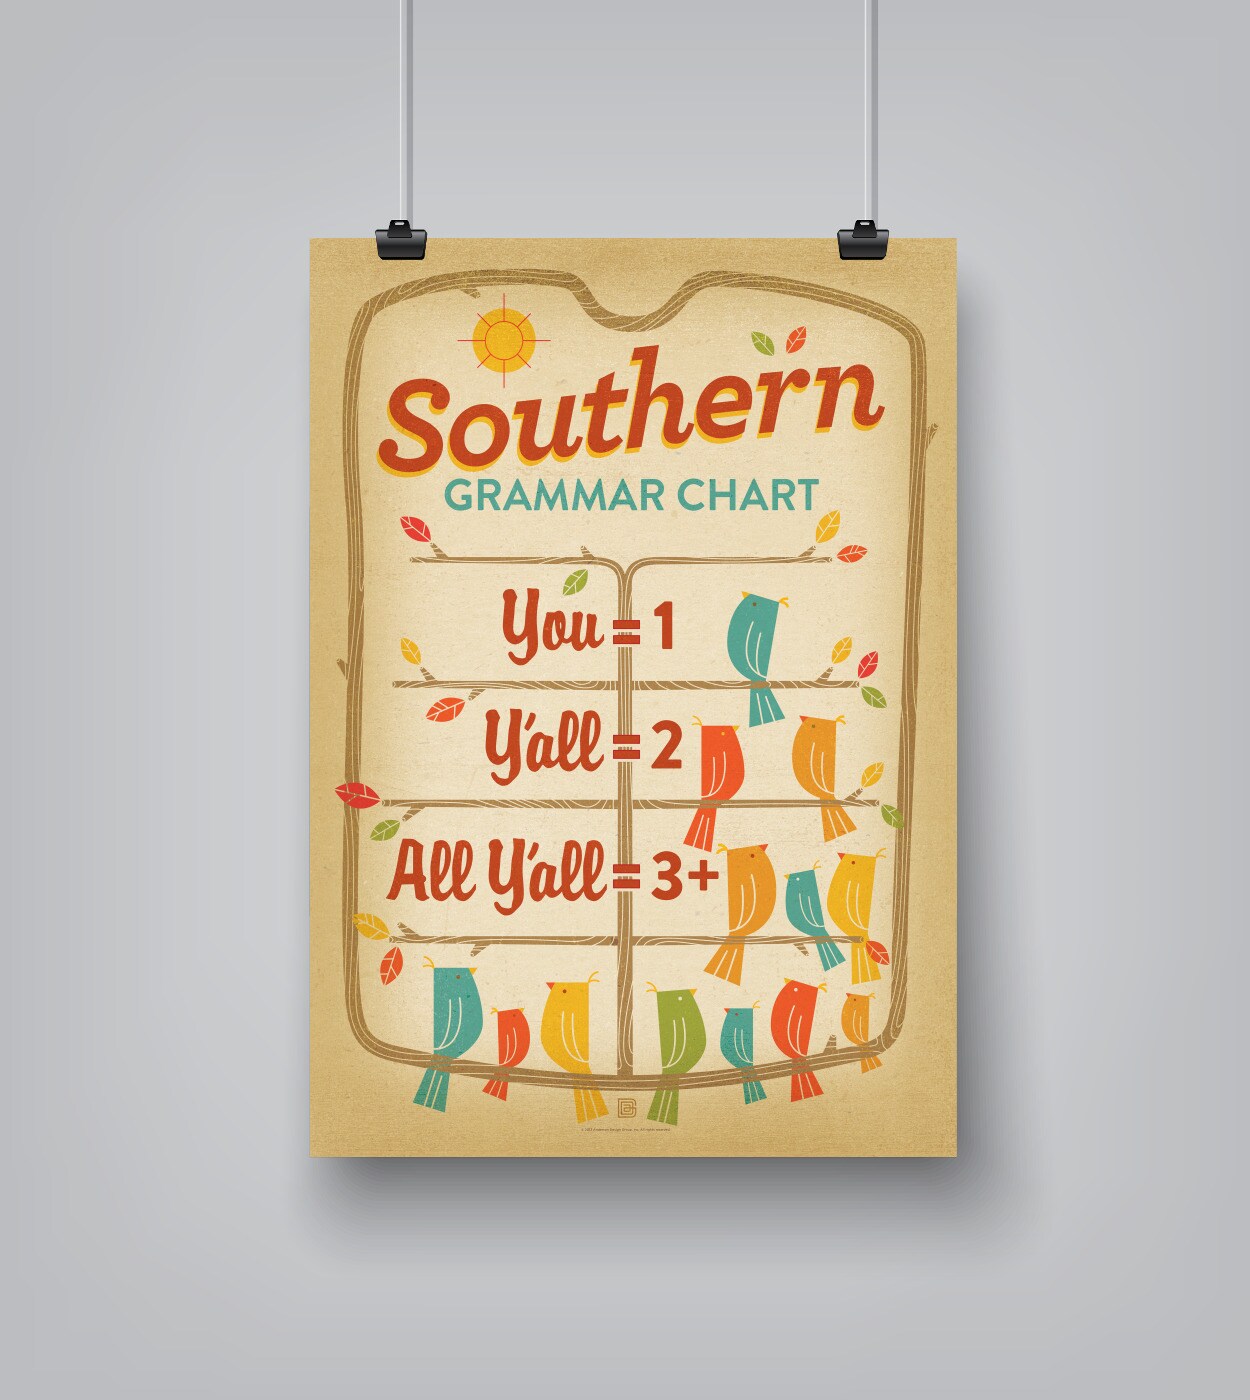 Grammar Chart by Anderson Design Group Poster Art Print  - Americanflat